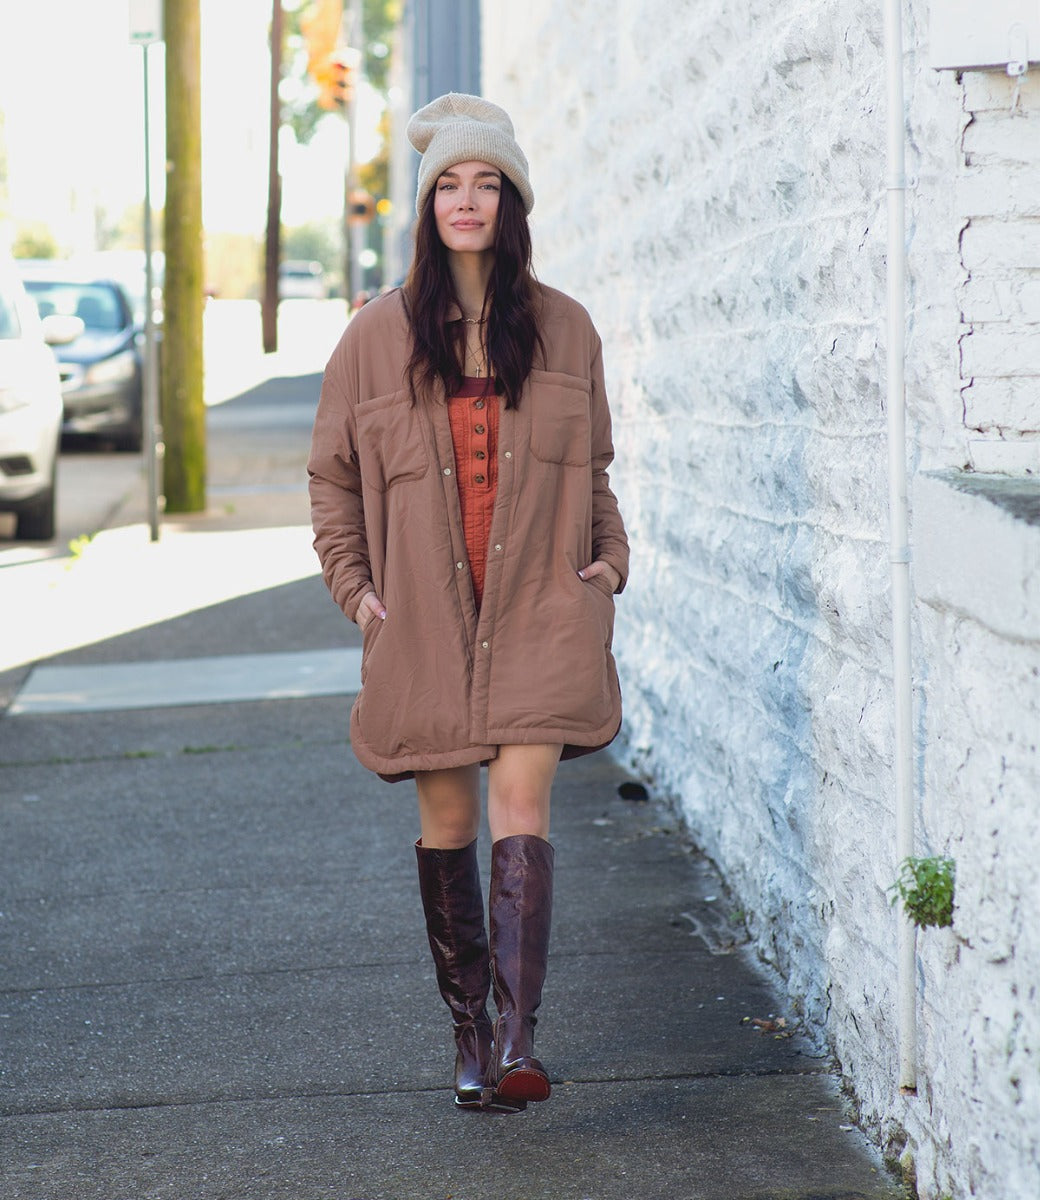 A woman in a brown coat and Bed Stu boots walking down a sidewalk.